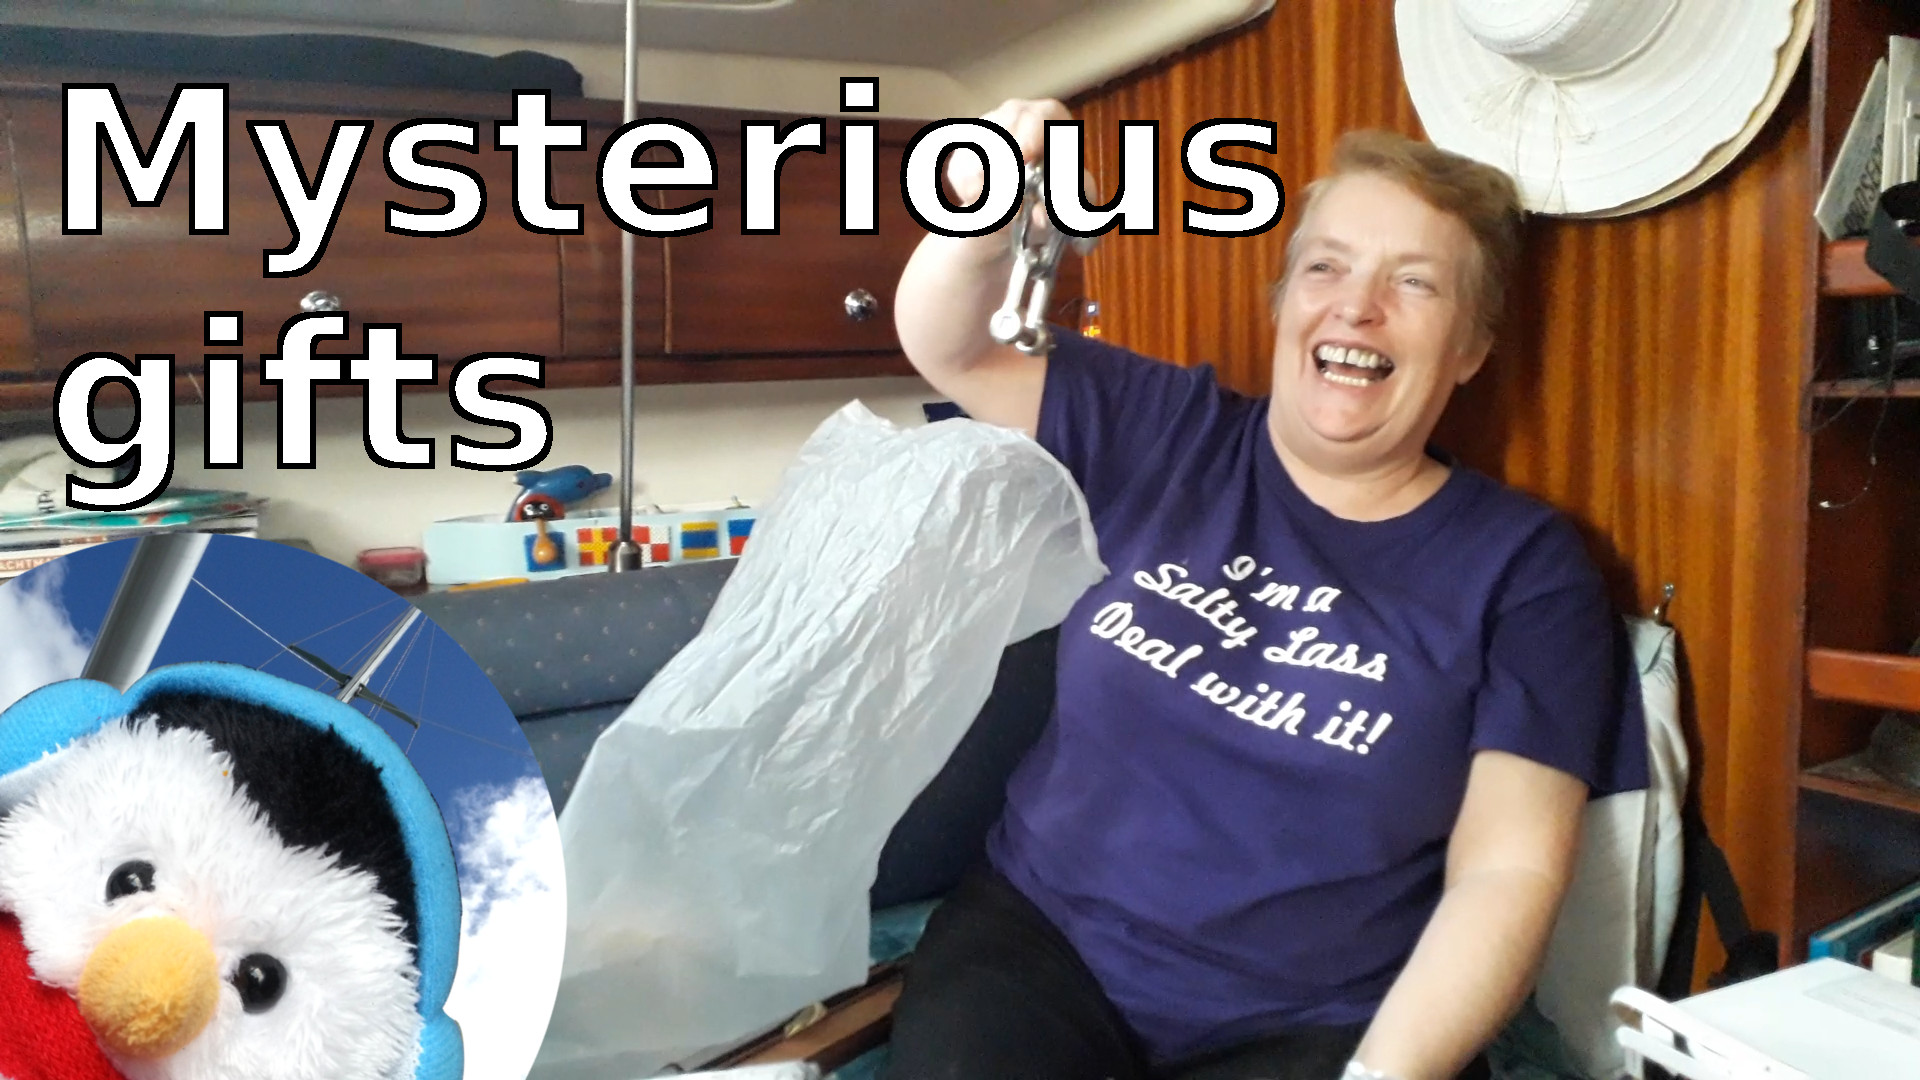 Watch our "Mysterious gifts" video and and add comments etc.